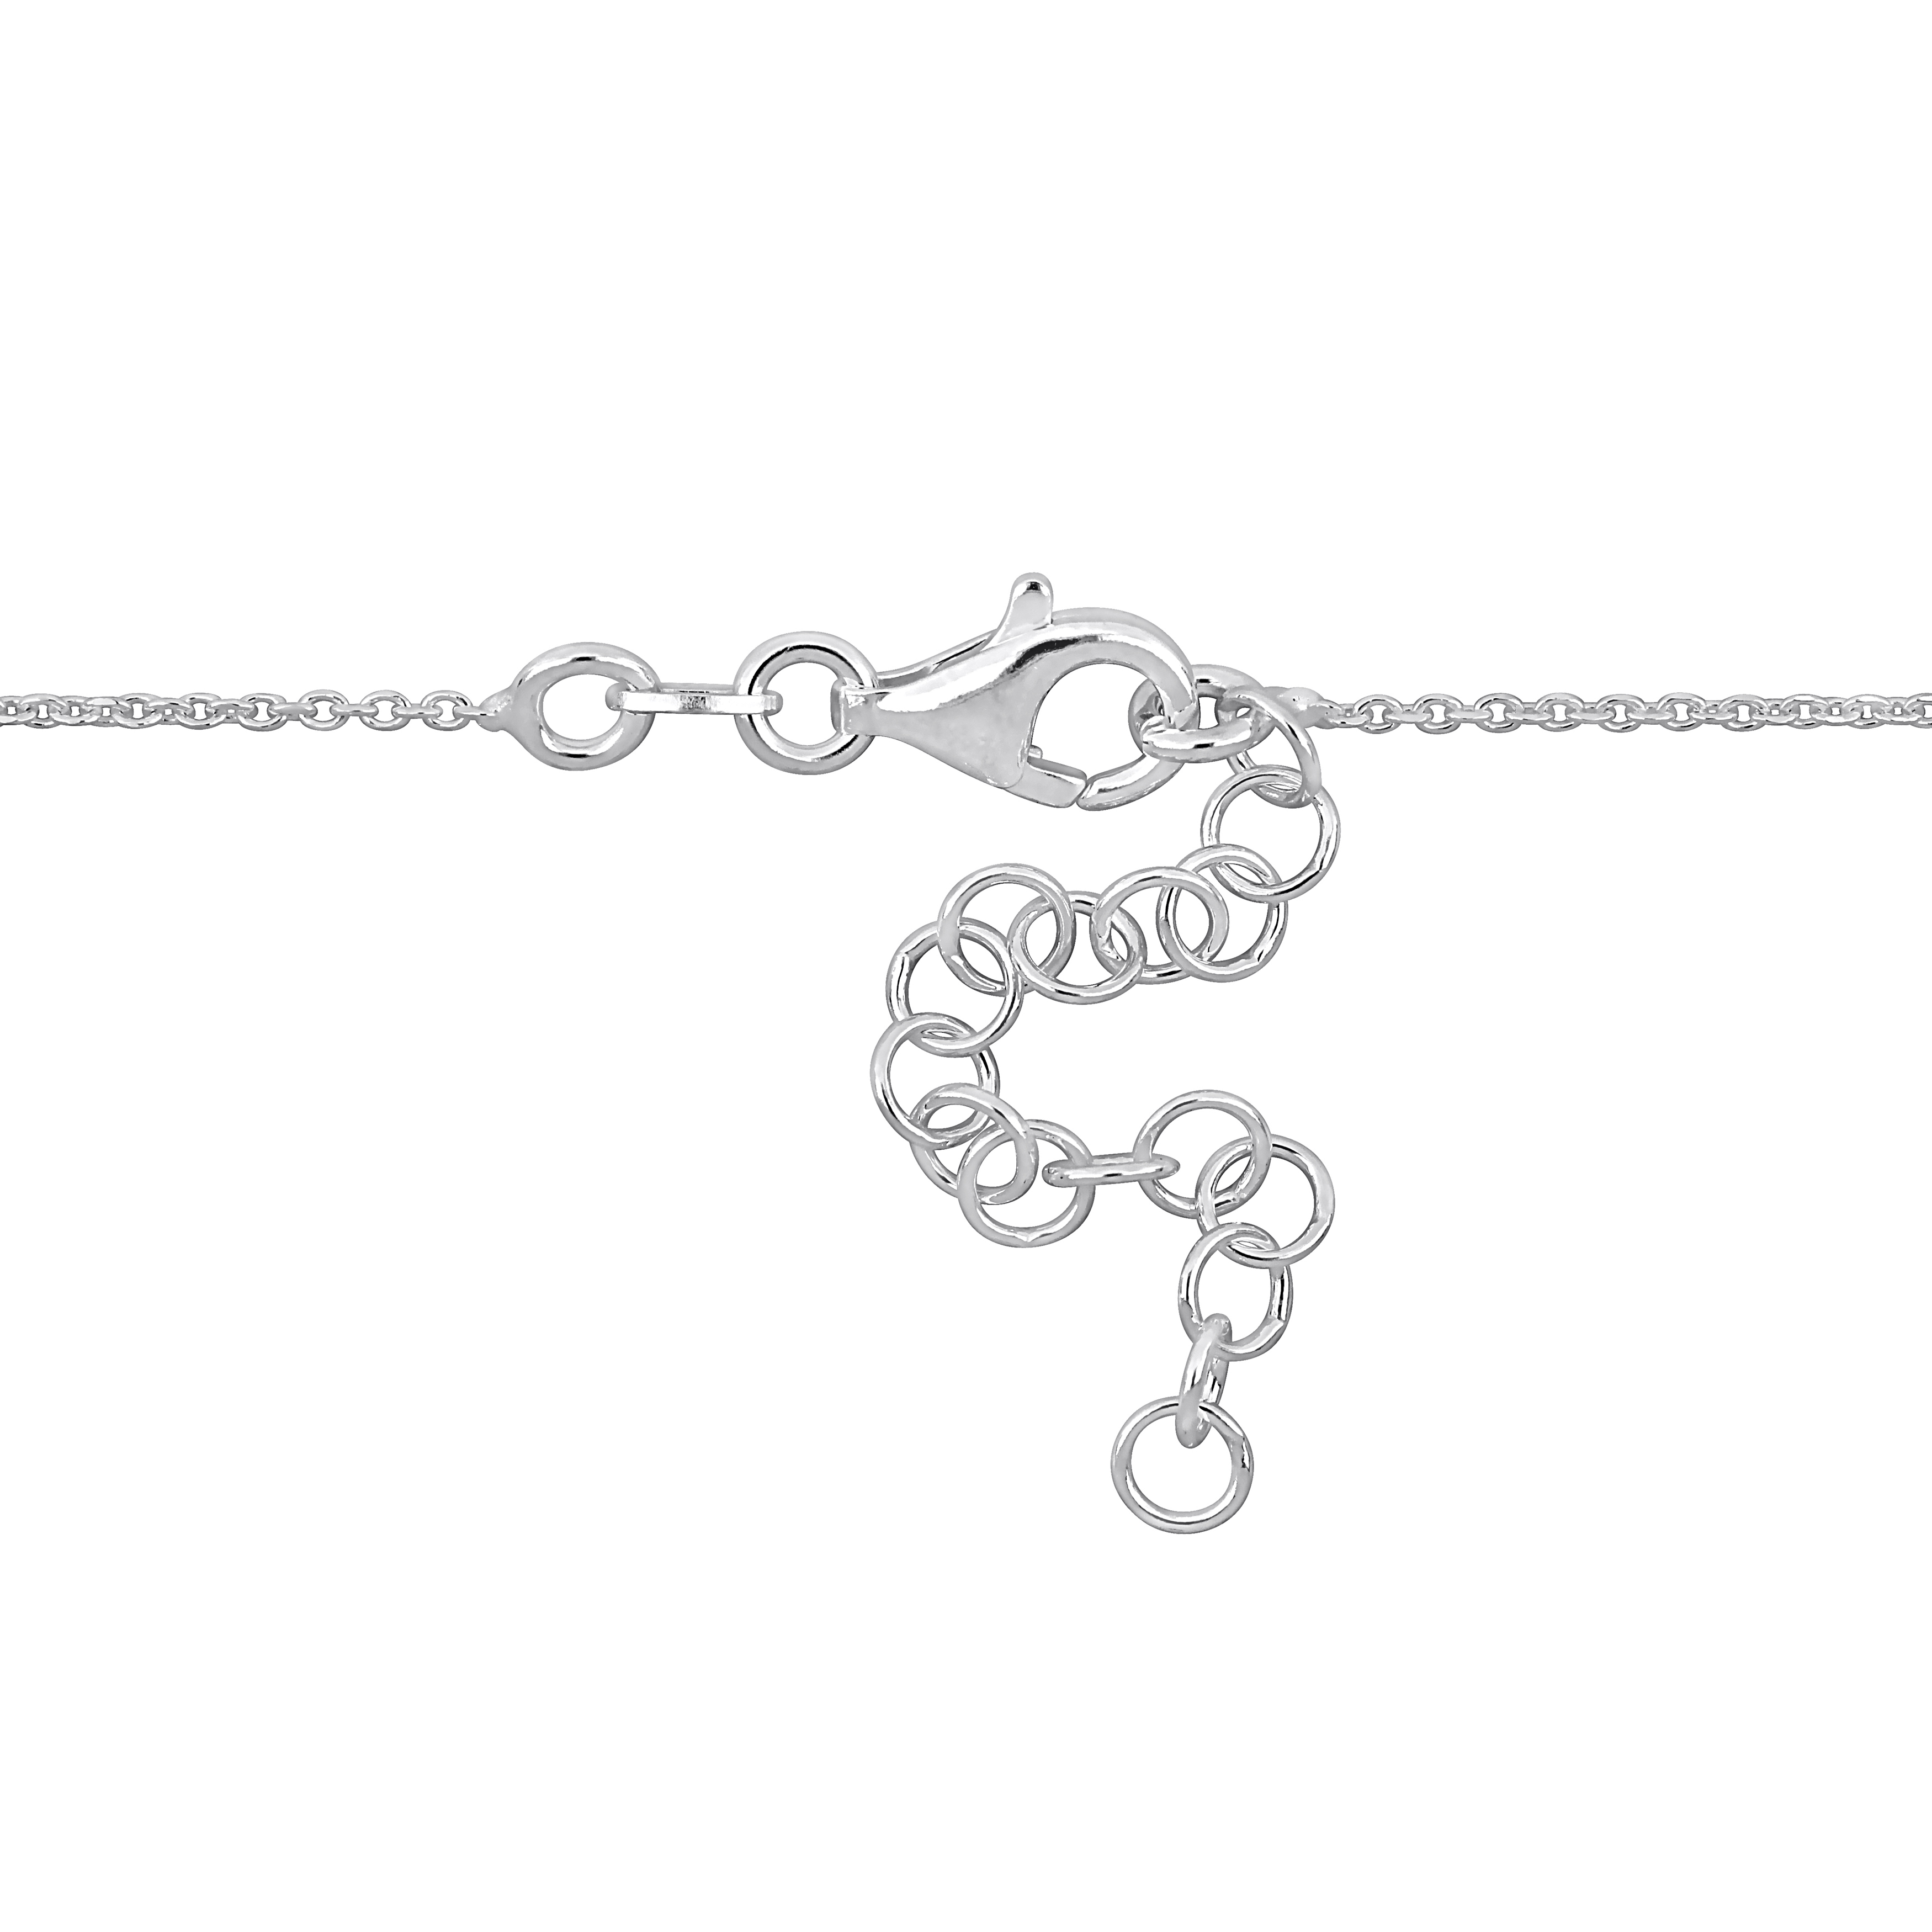 Heart Charm Bracelet on Cable Chain in Sterling Silver - 6.5+1 in.